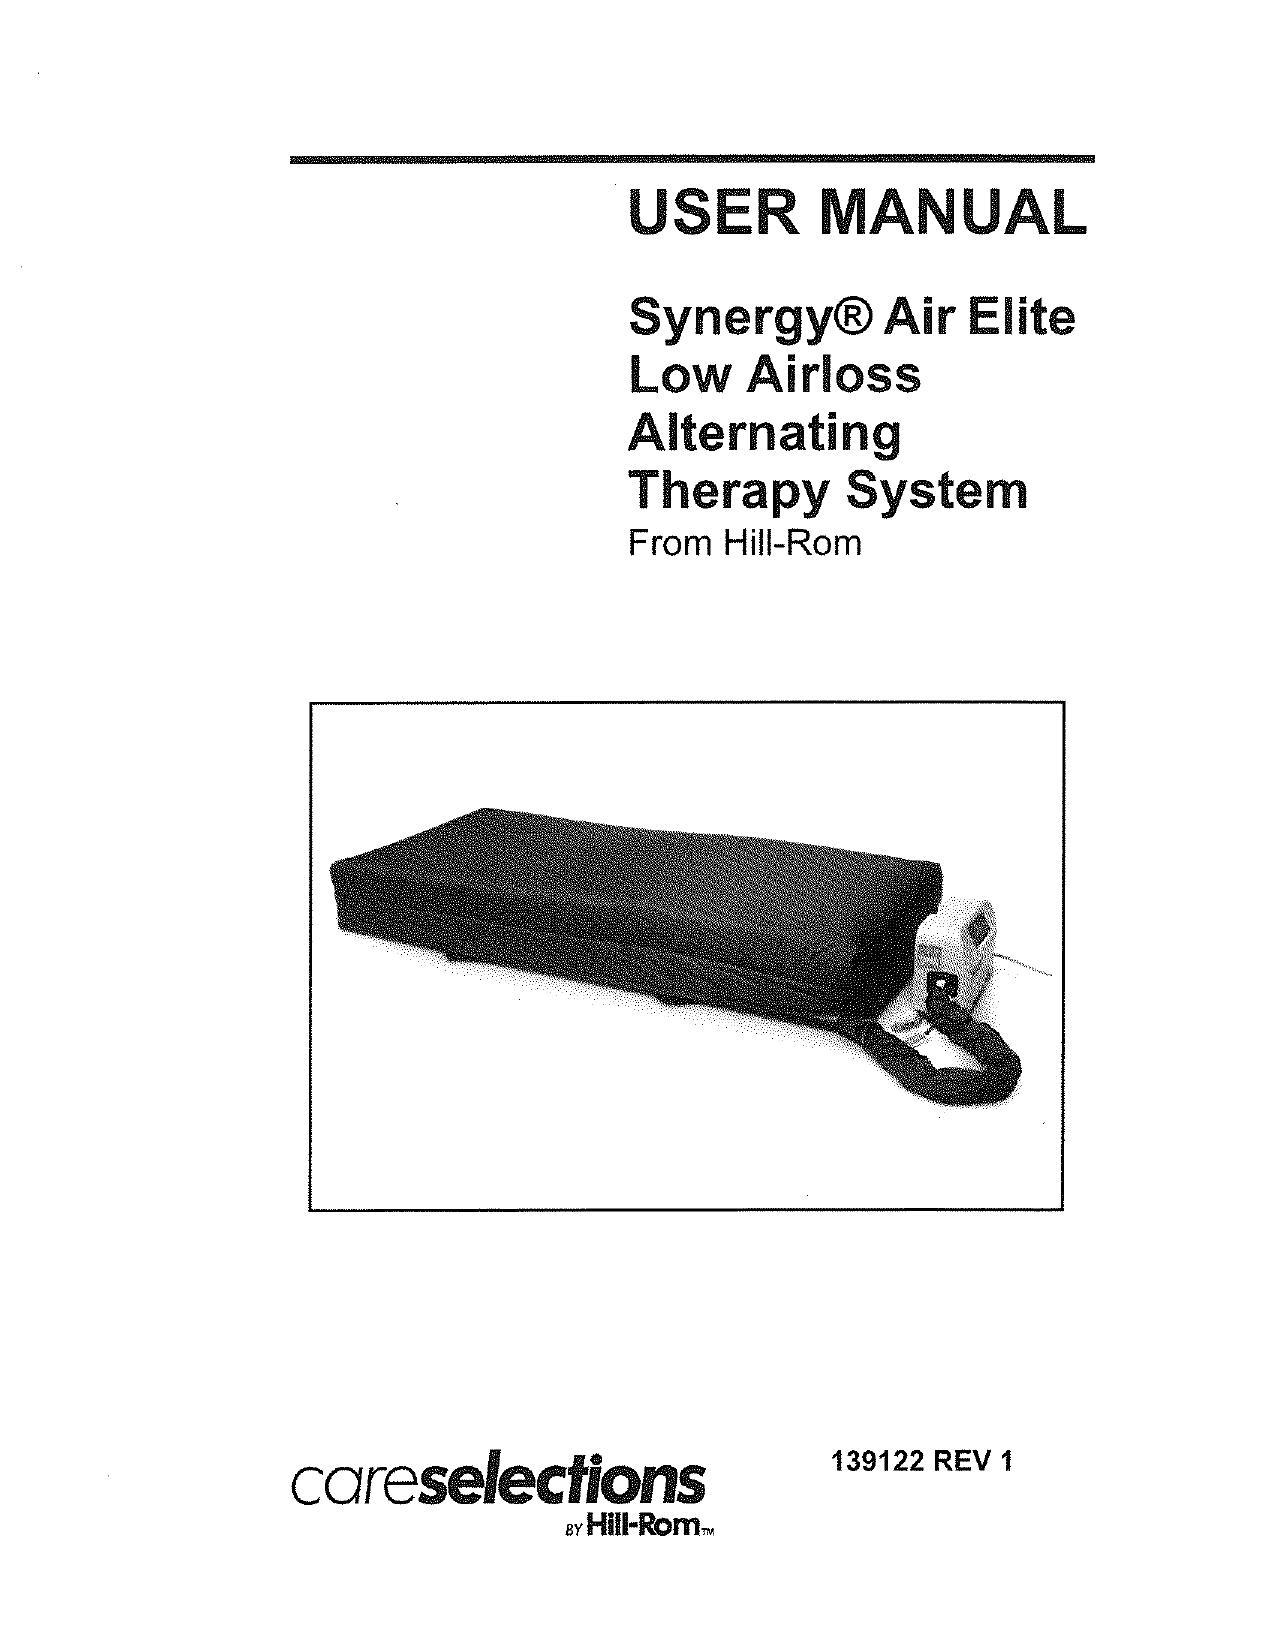 synergy-air-elite-low-airloss-alternating-therapy-system-user-manual.pdf